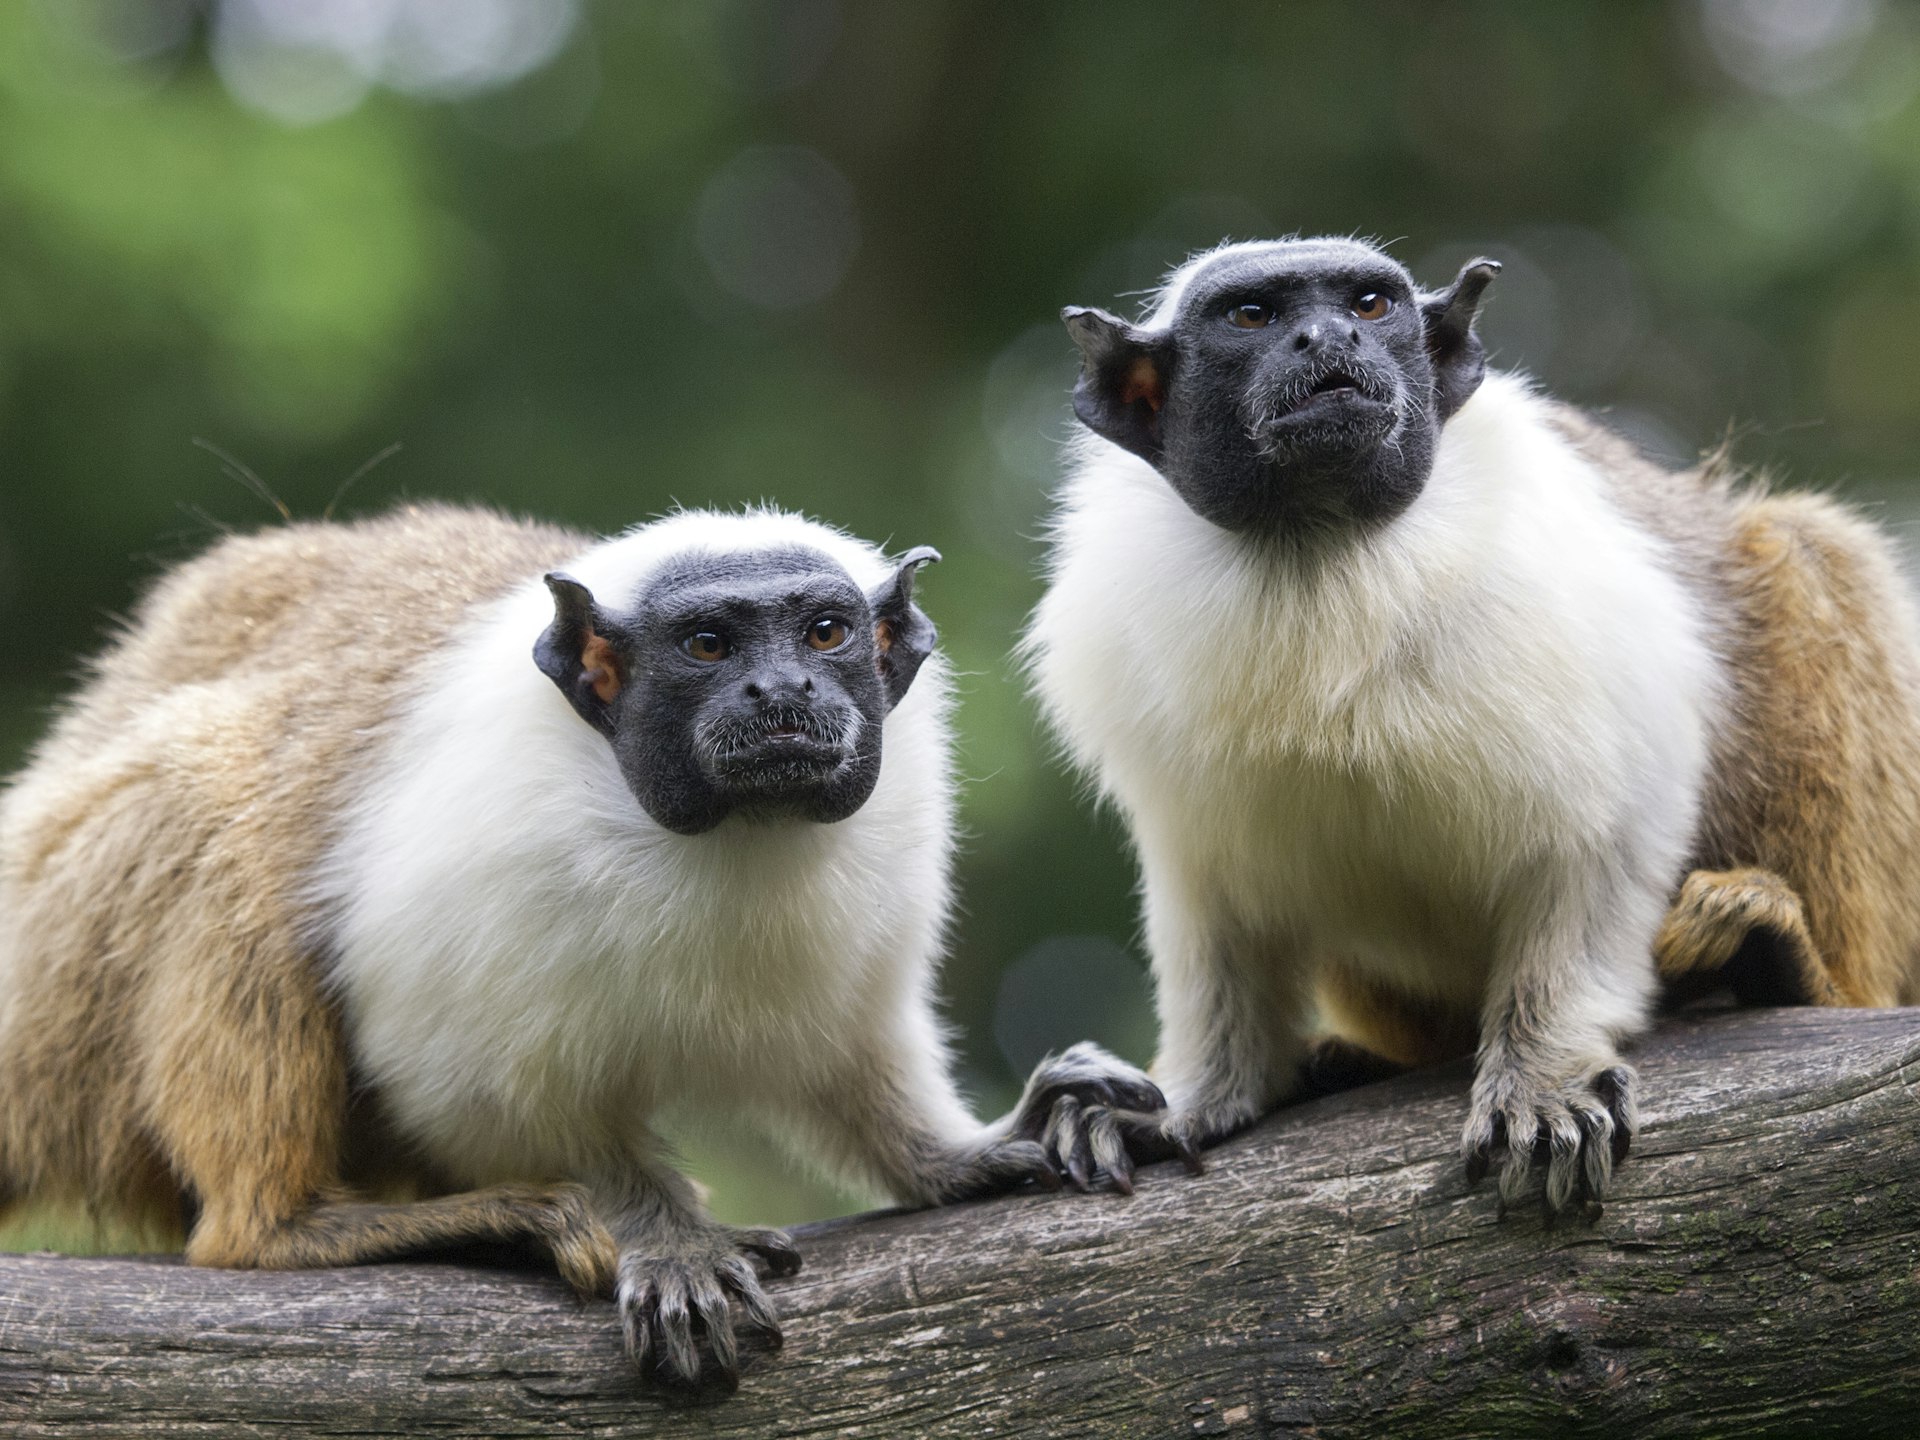 Two mantle tamarins – primates with dark faces, white cowls and brown bodies –on a tree branch